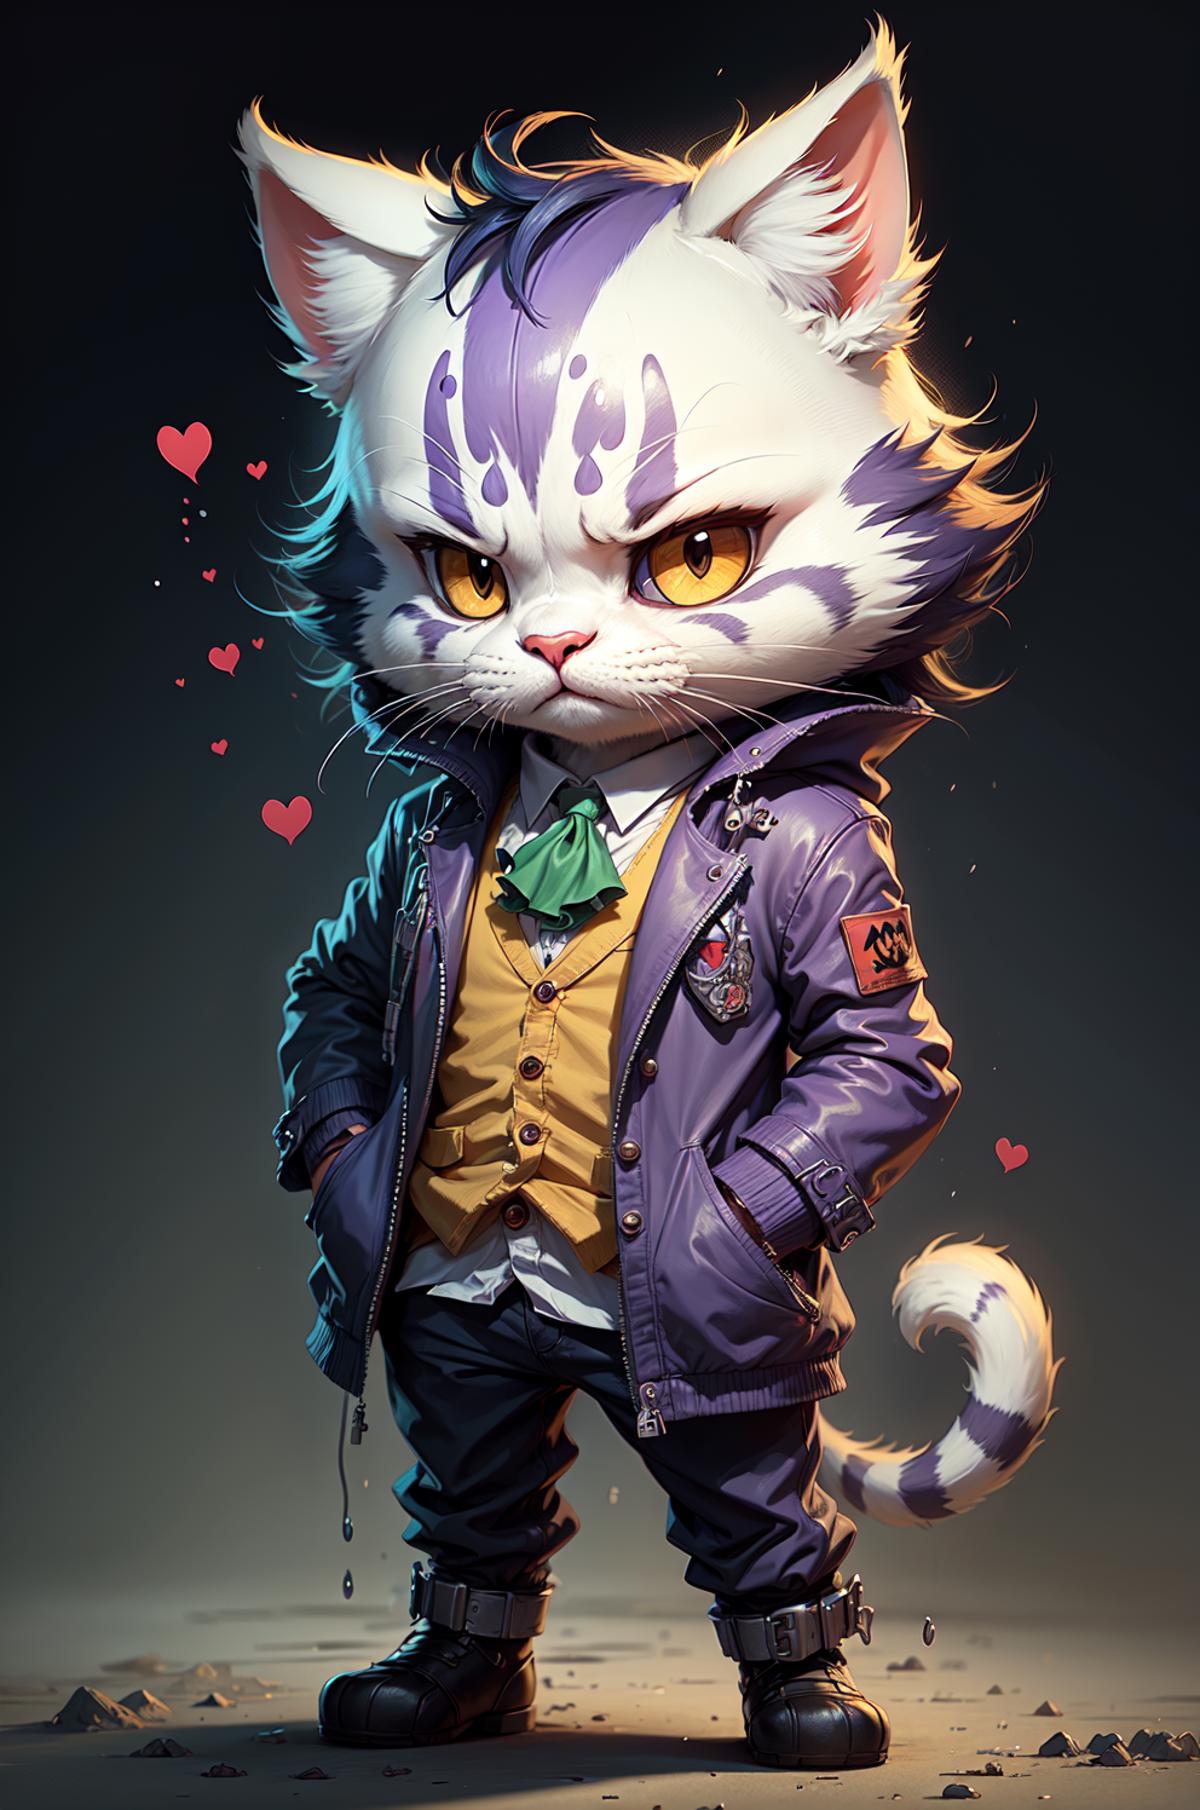 A cat wearing a jacket and tie with a purple and white coat, standing on his hind legs.